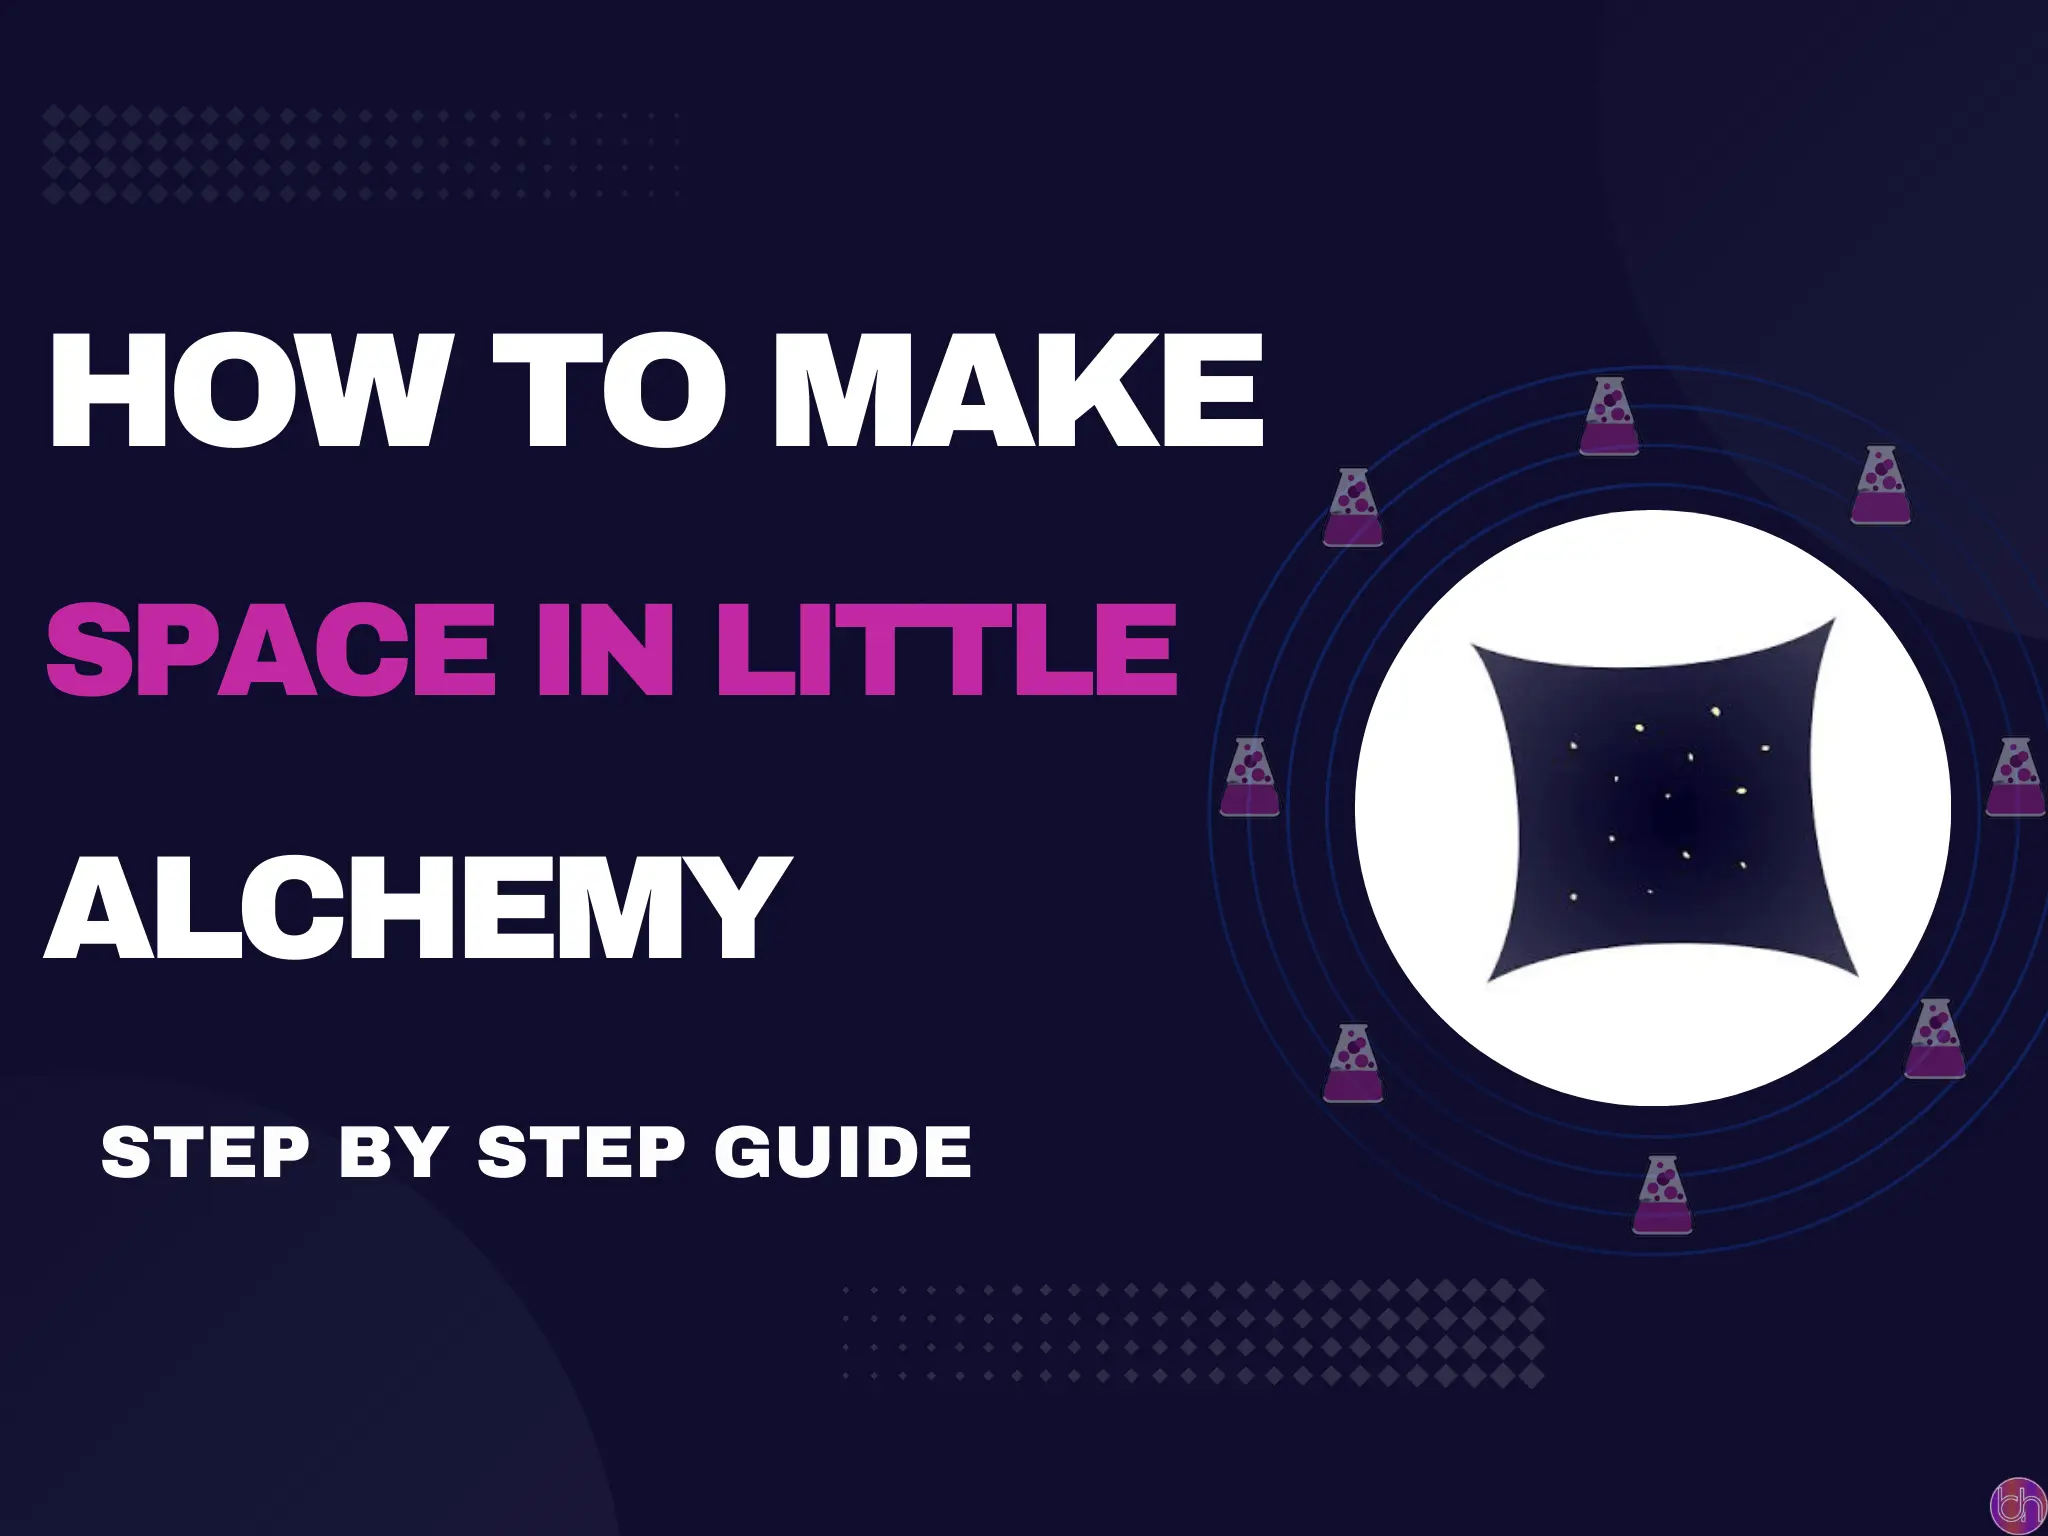 How to make Space in little alchemy